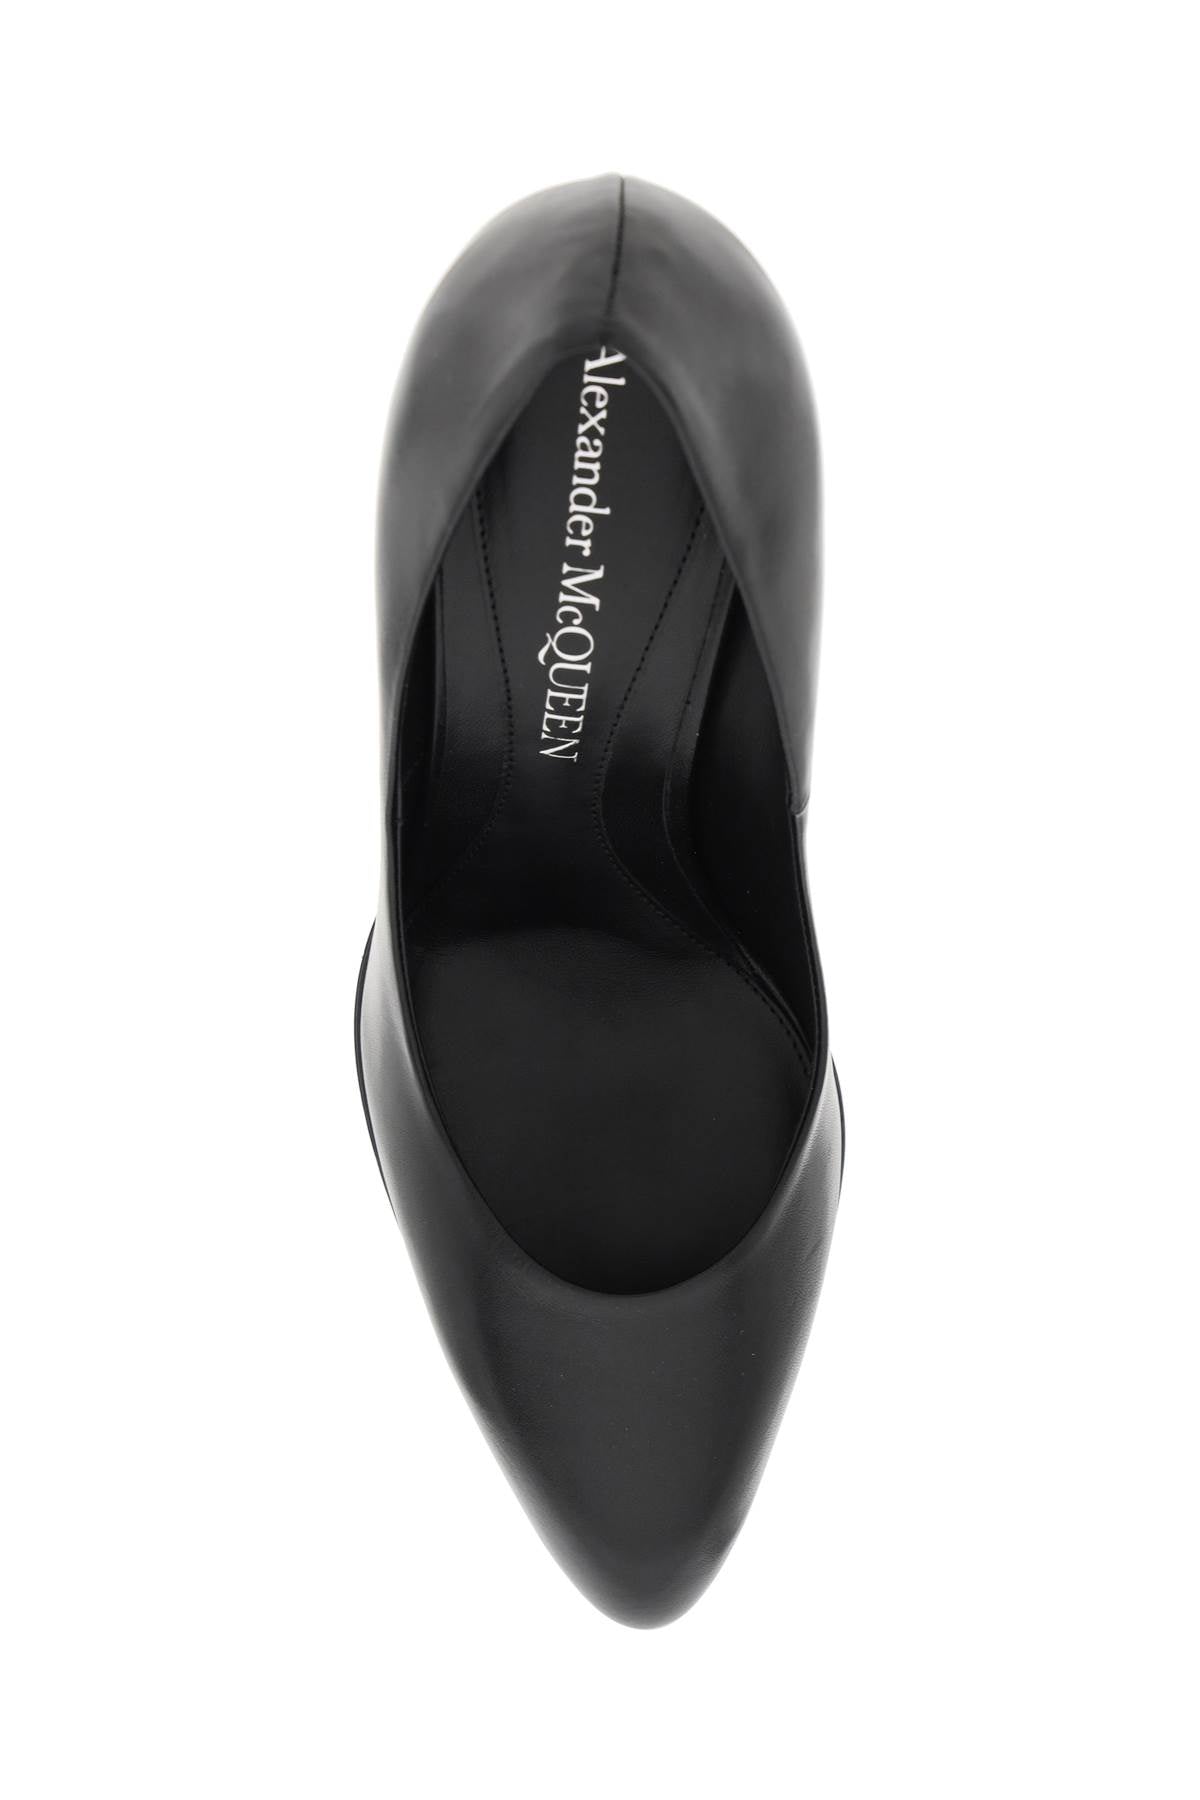 ALEXANDER MCQUEEN Multicolor Leather Décolleté with Signature Gold and Silver Armadillo Heel for Women